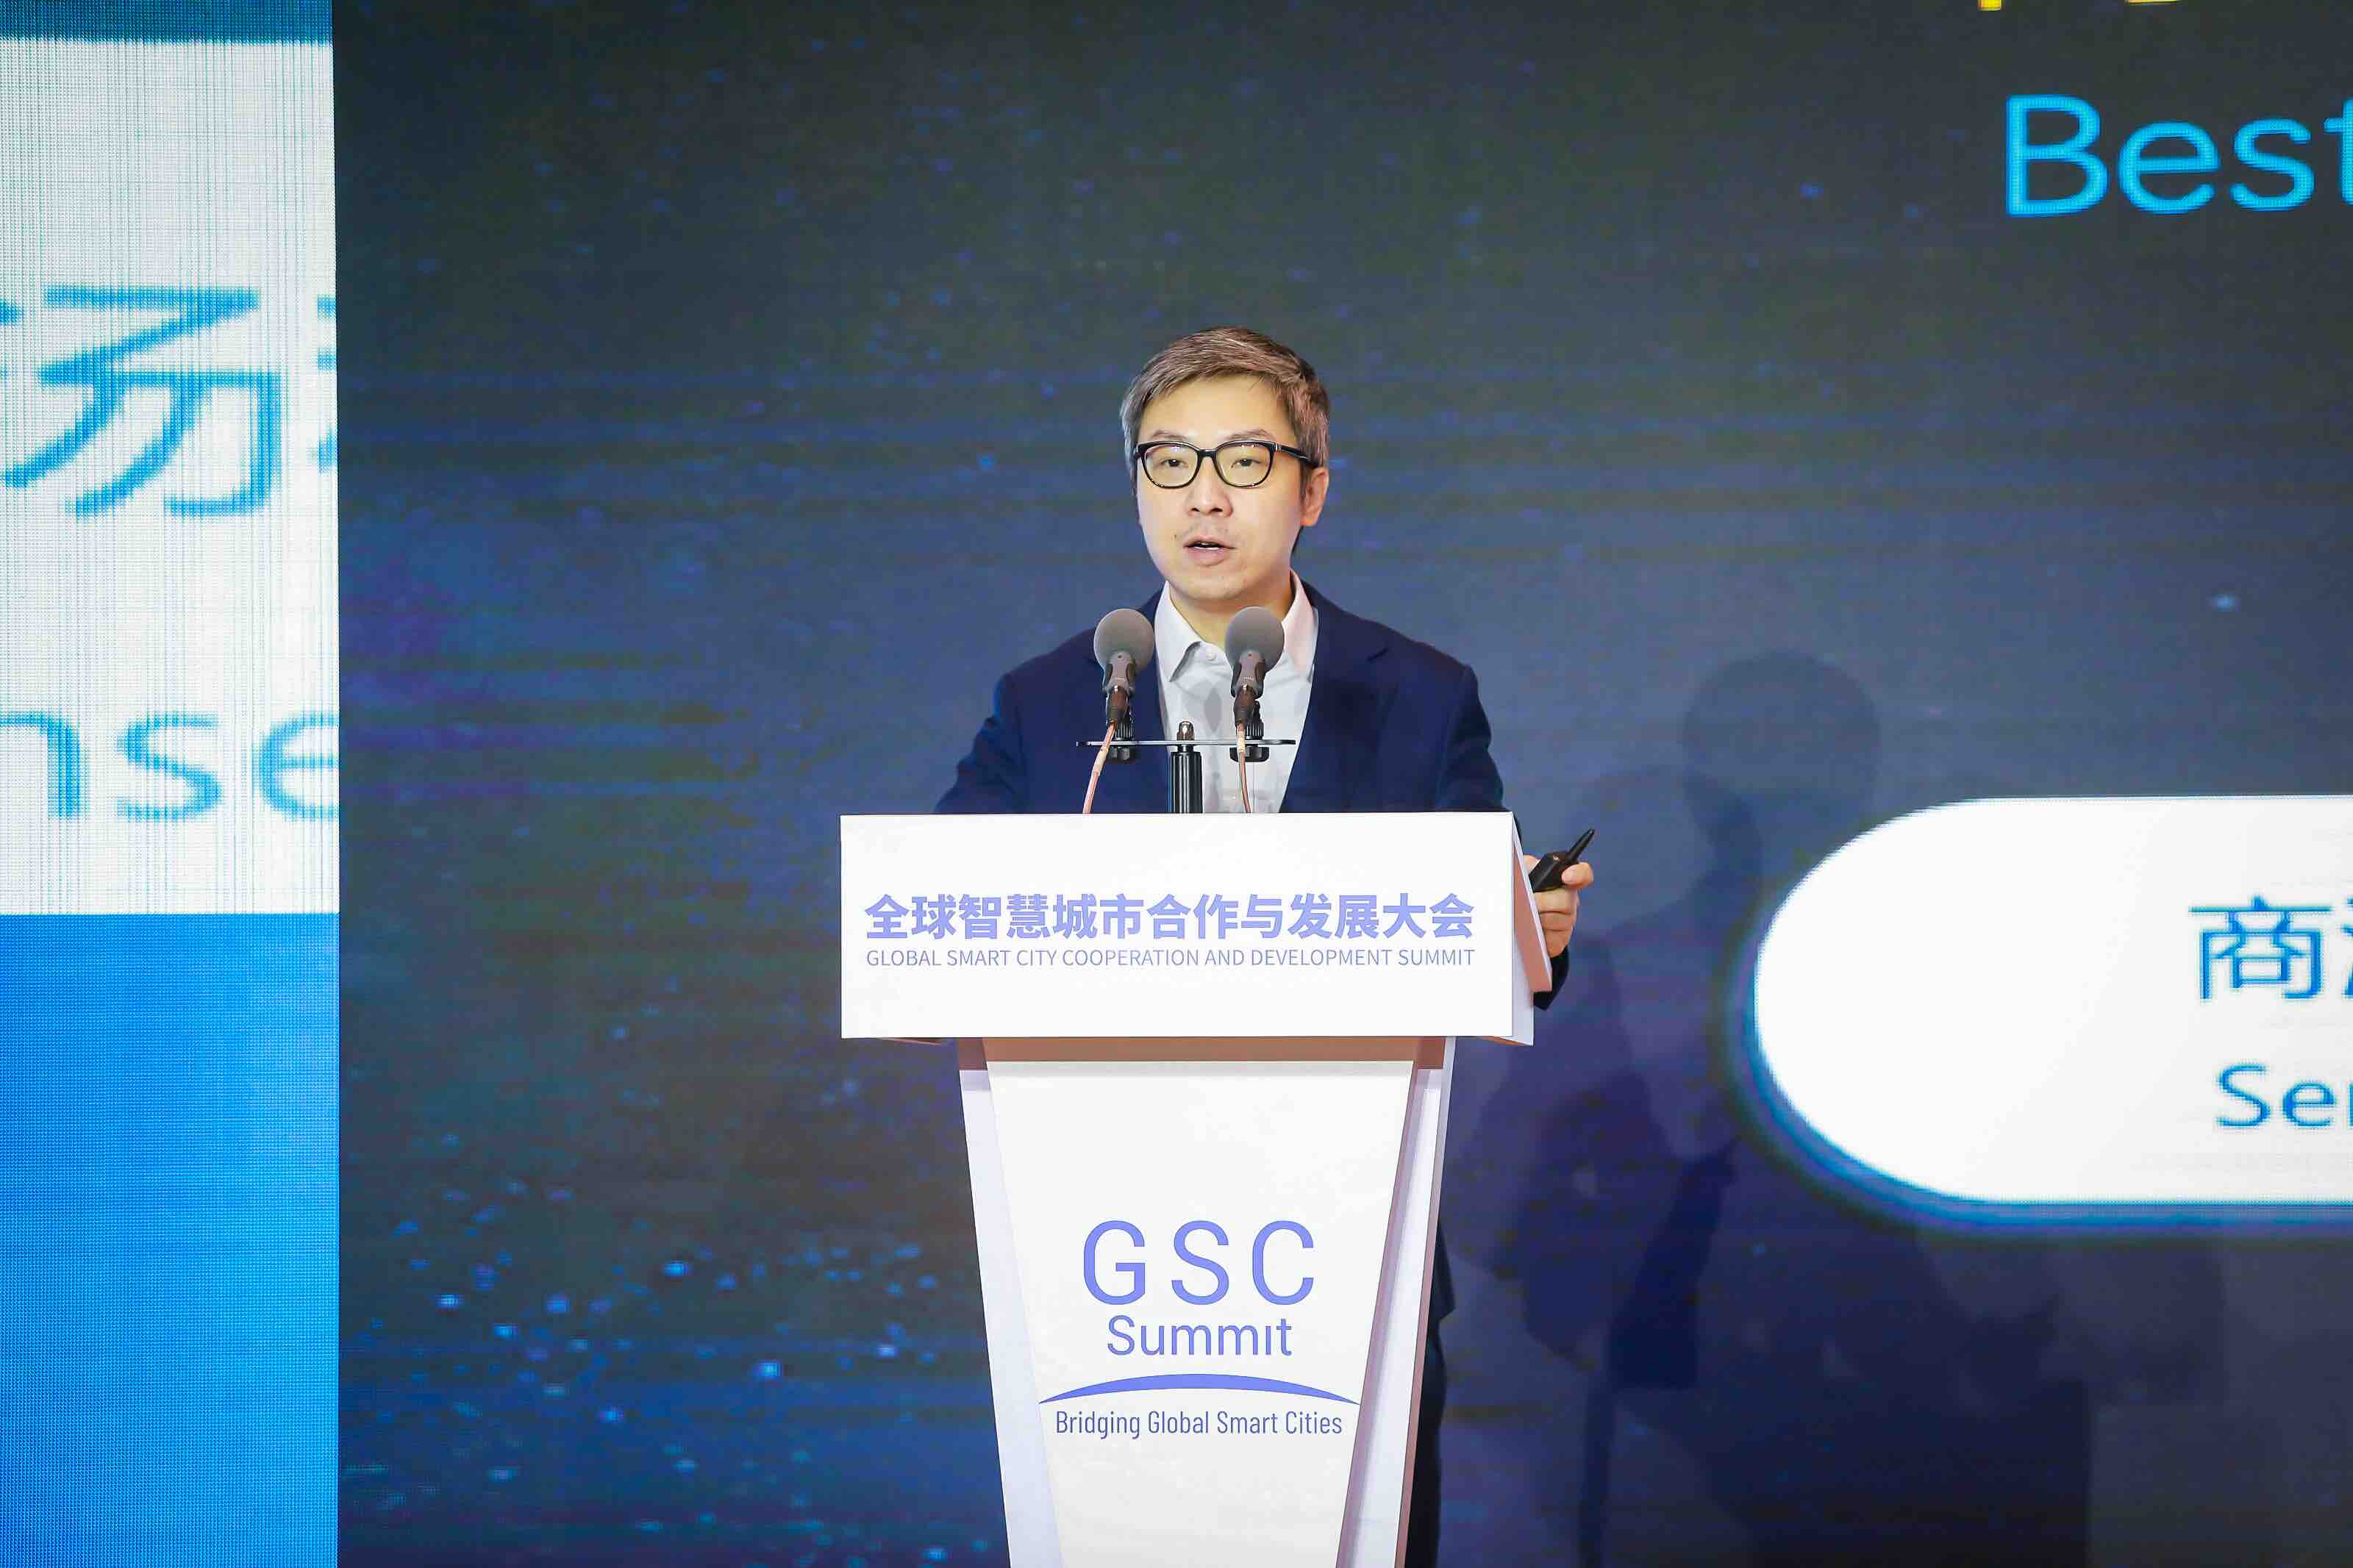 Zhang Guobei, Vice President of SenseTime, delivered the speech at the GSC Summit